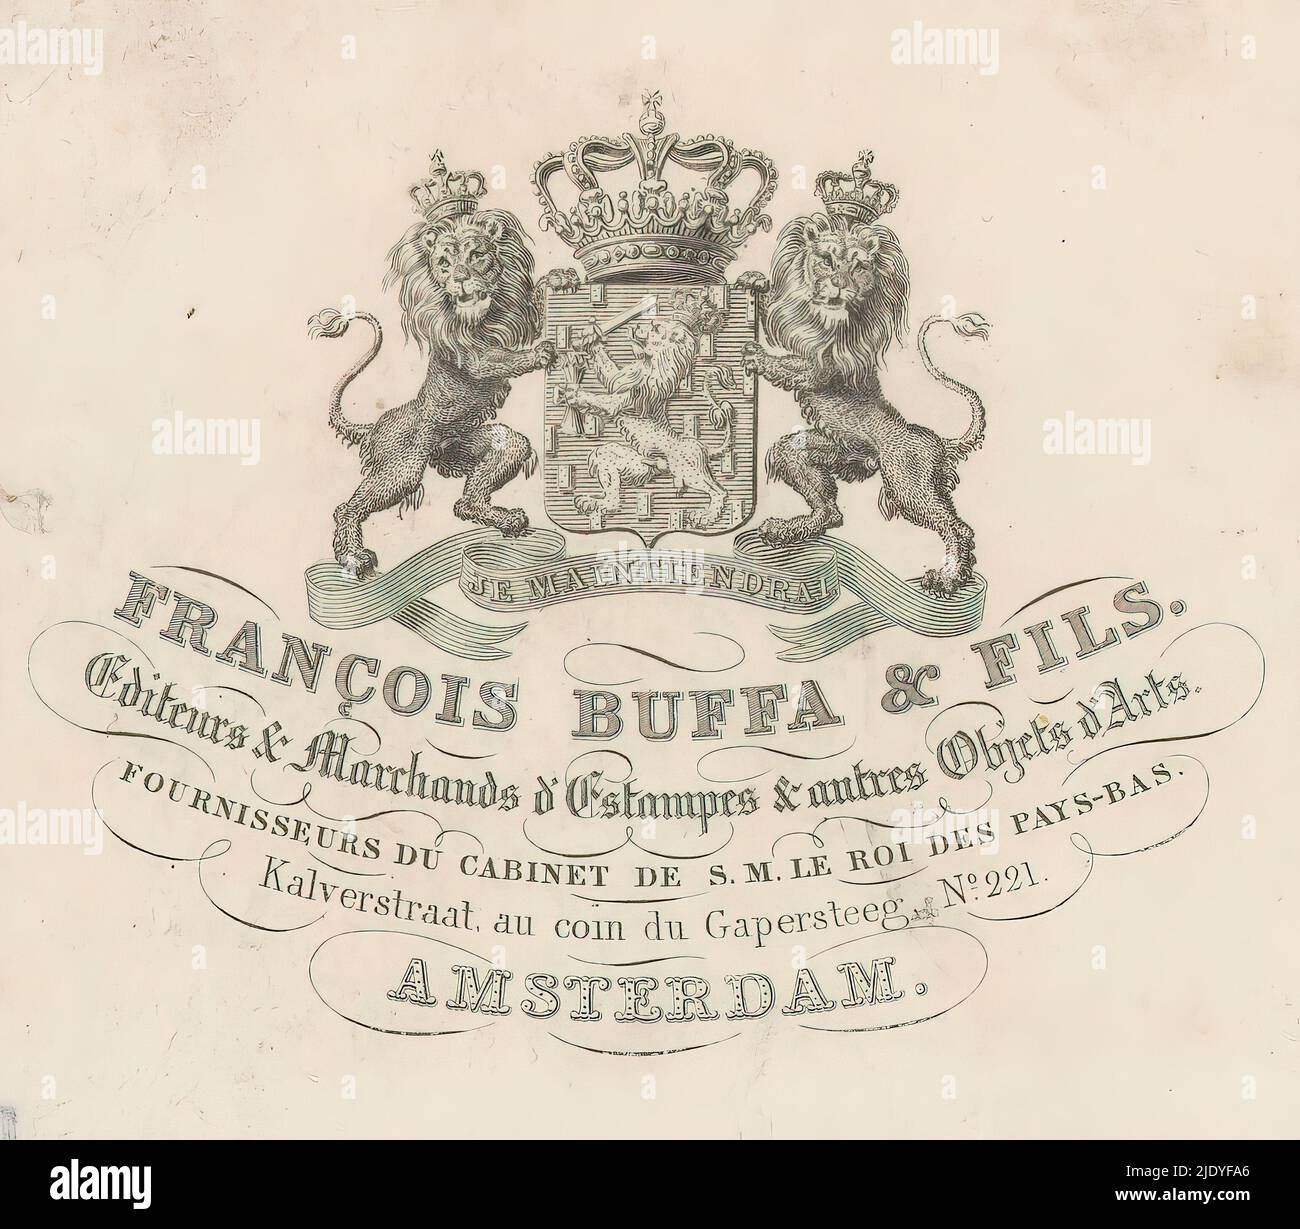 Business card of Frans Buffa and sons, Coat of arms of the Netherlands with motto: Je Maintiendrai; name and address of the firm of Frans Buffa and sons, purveyor to the court., print maker: Henricus Wilhelmus Couwenberg, Amsterdam, 1830 - 1854, paper, etching, height 88 mm × width 104 mm Stock Photo